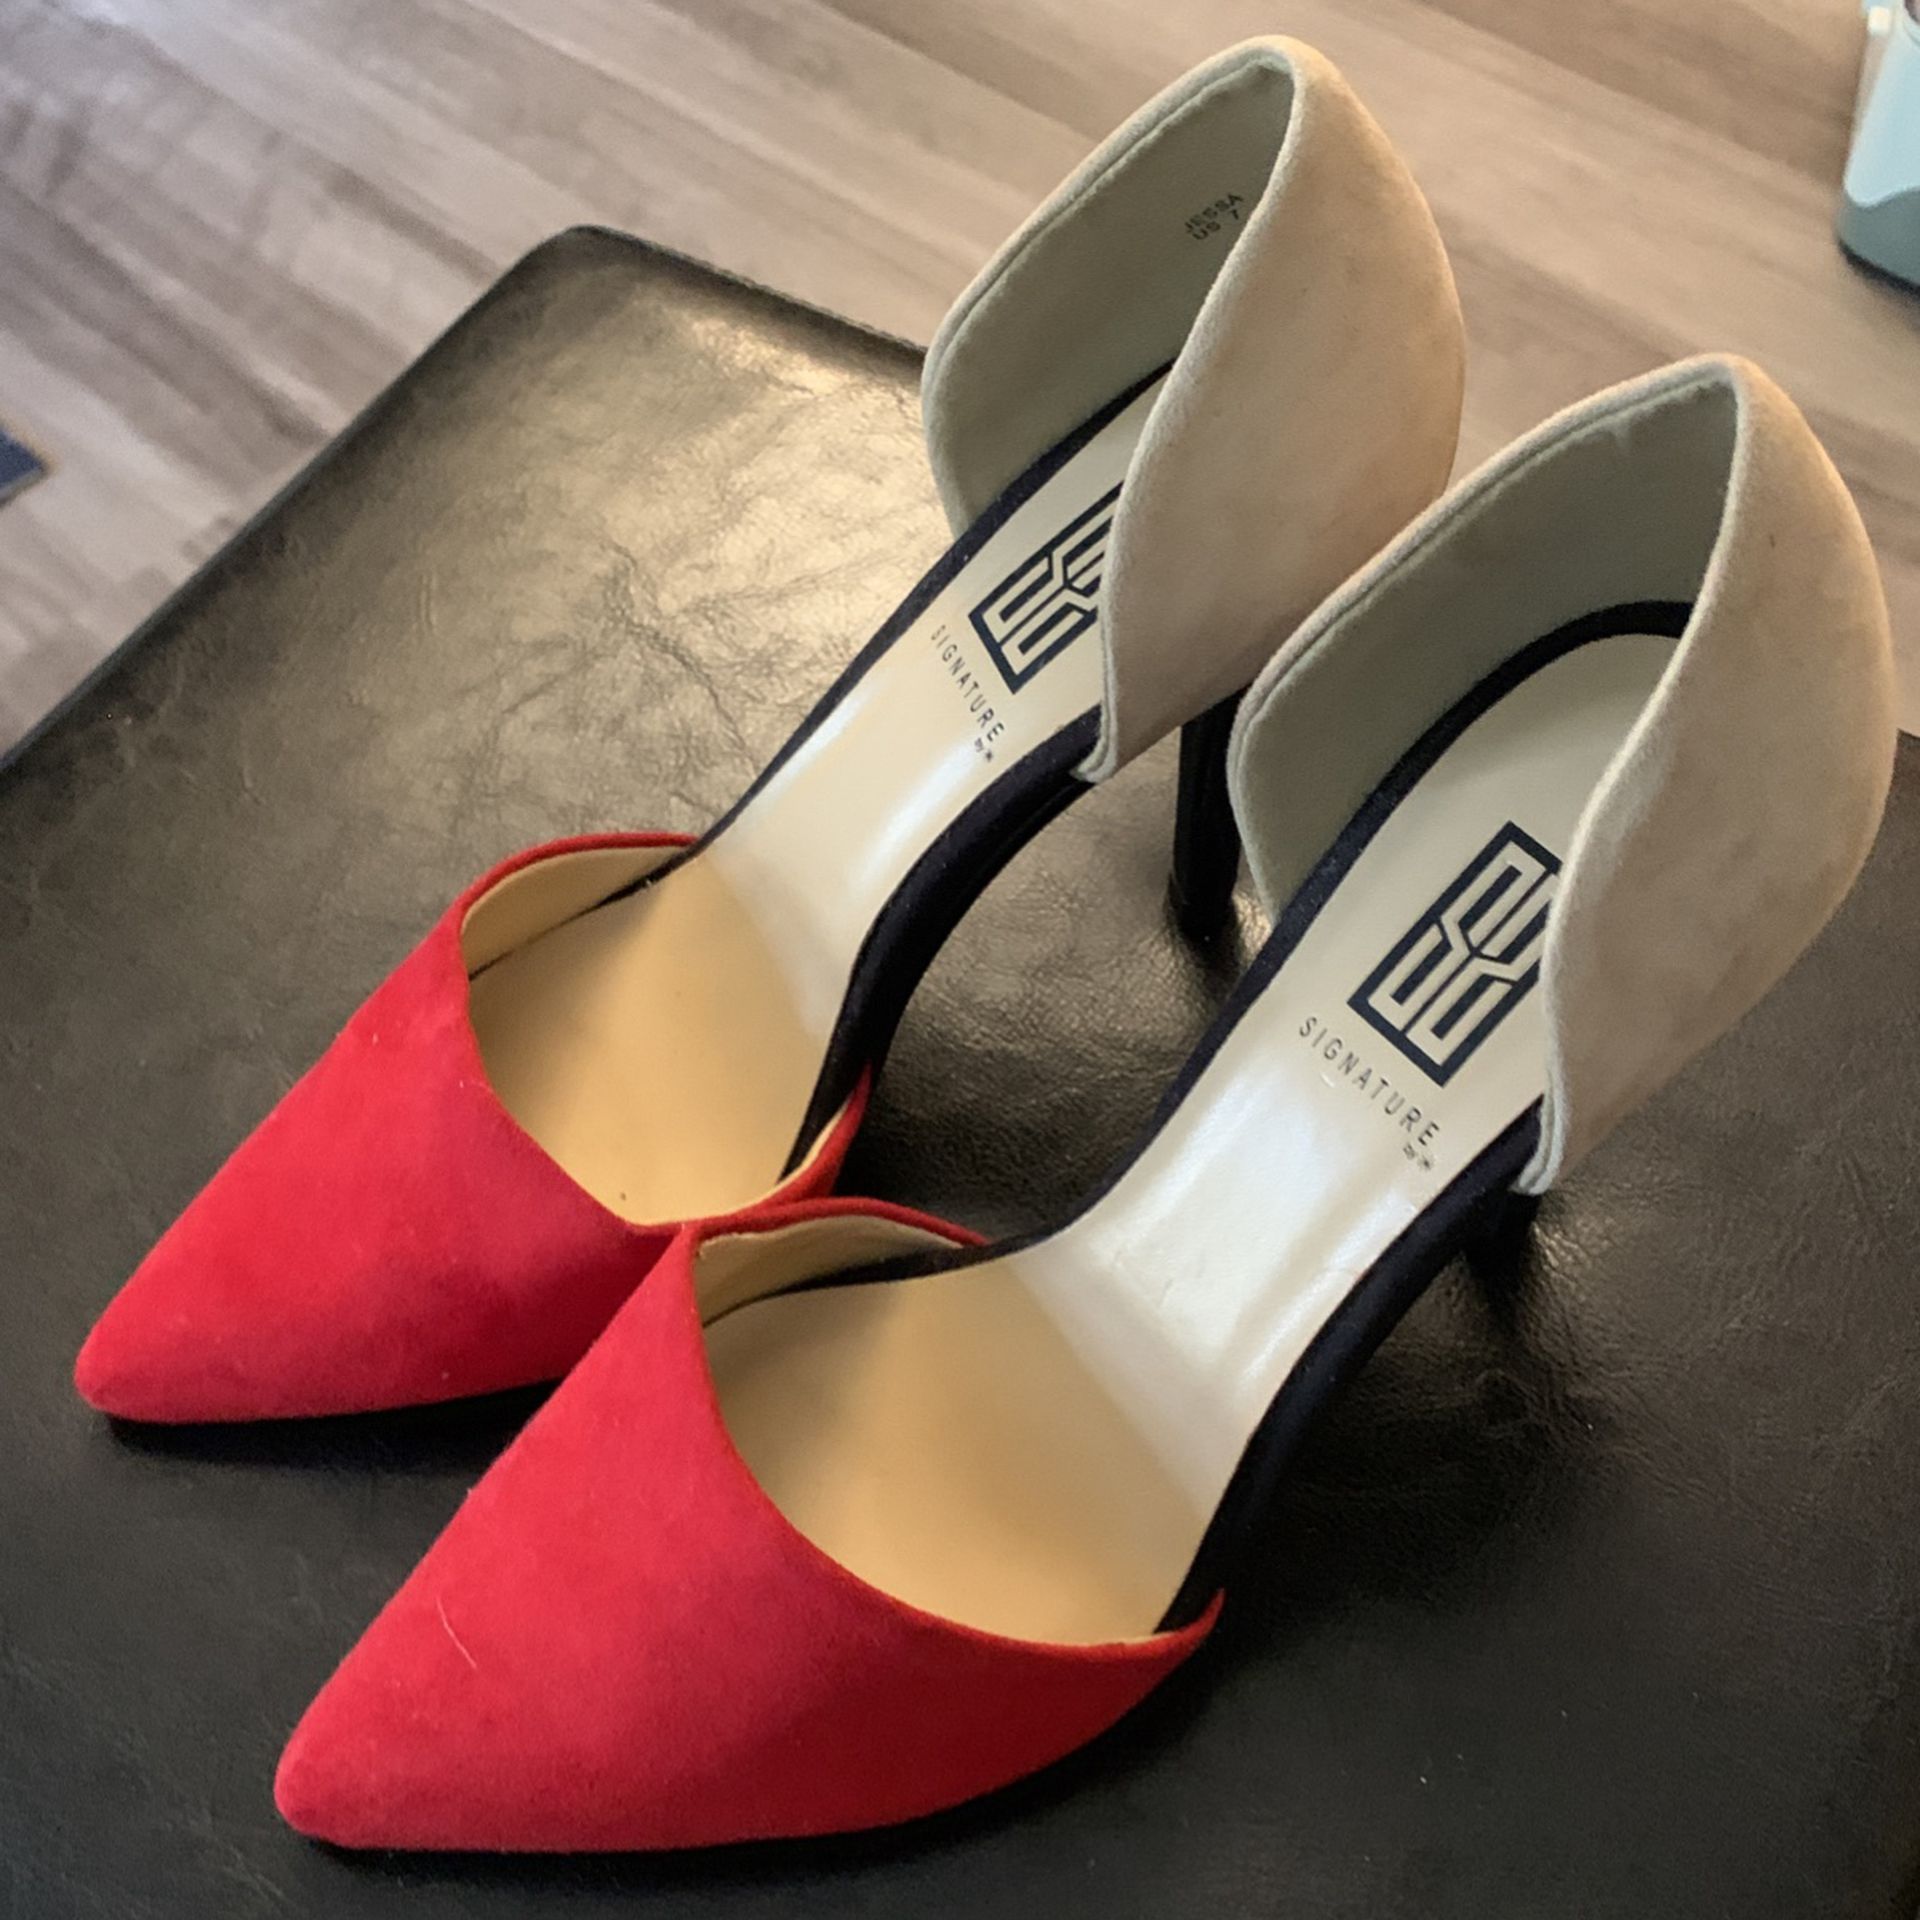 4” Heels - Size 7 - Red And beige